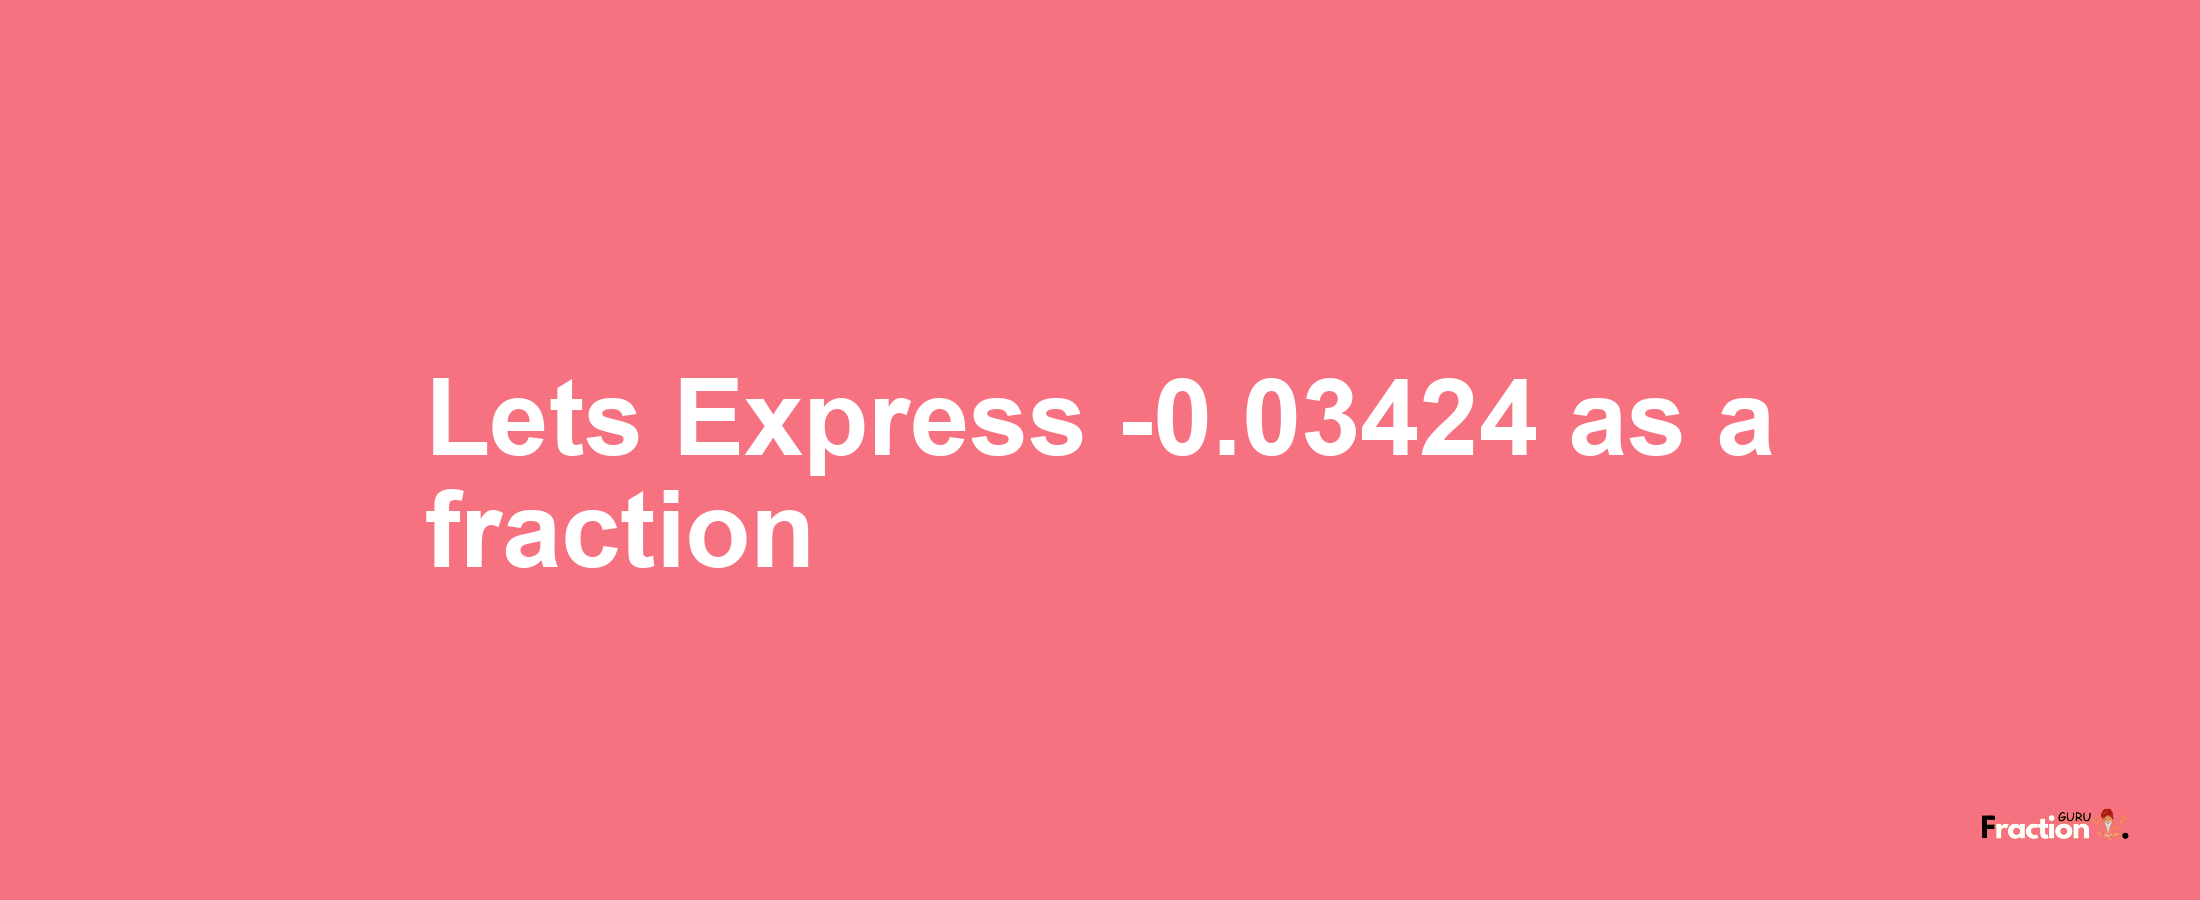 Lets Express -0.03424 as afraction